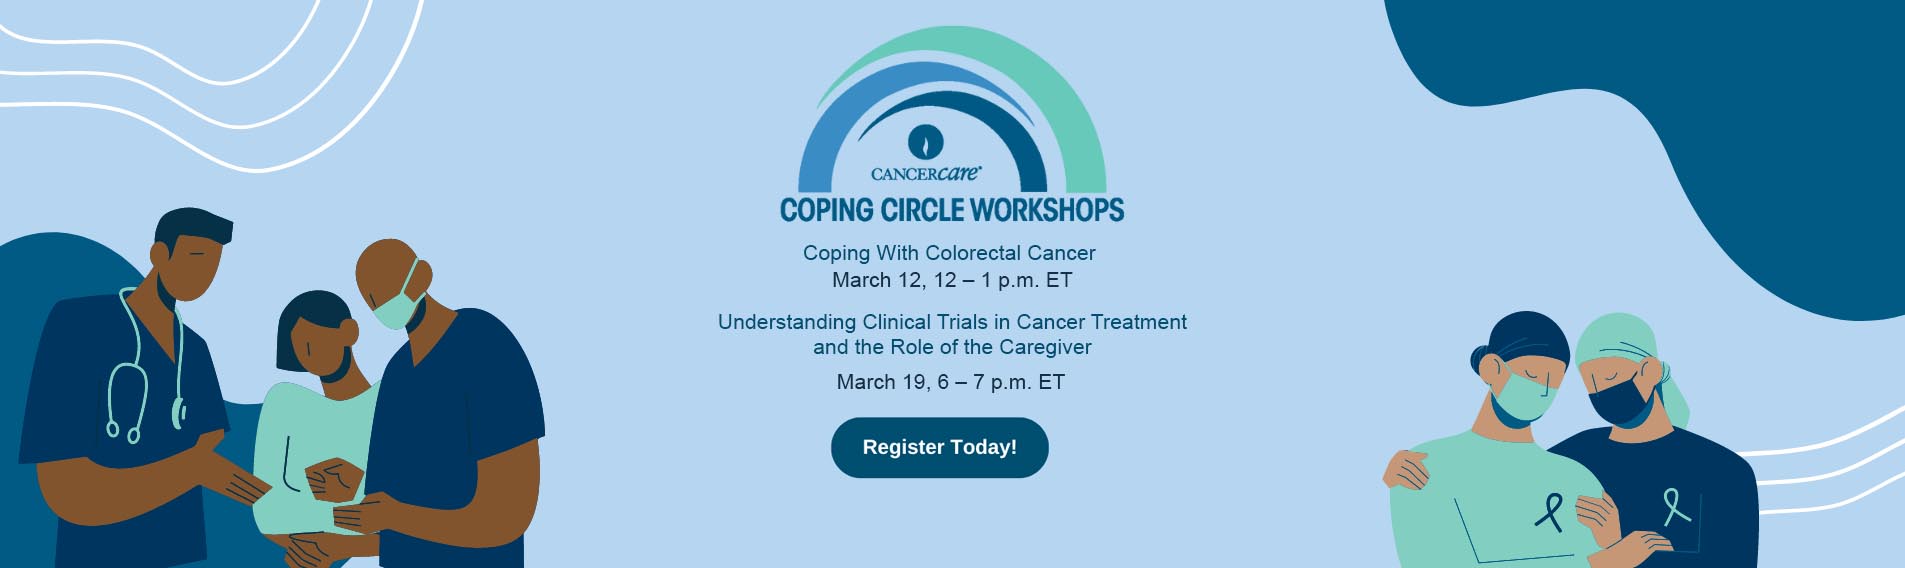 Image of calendar of upcoming coping circle workshops